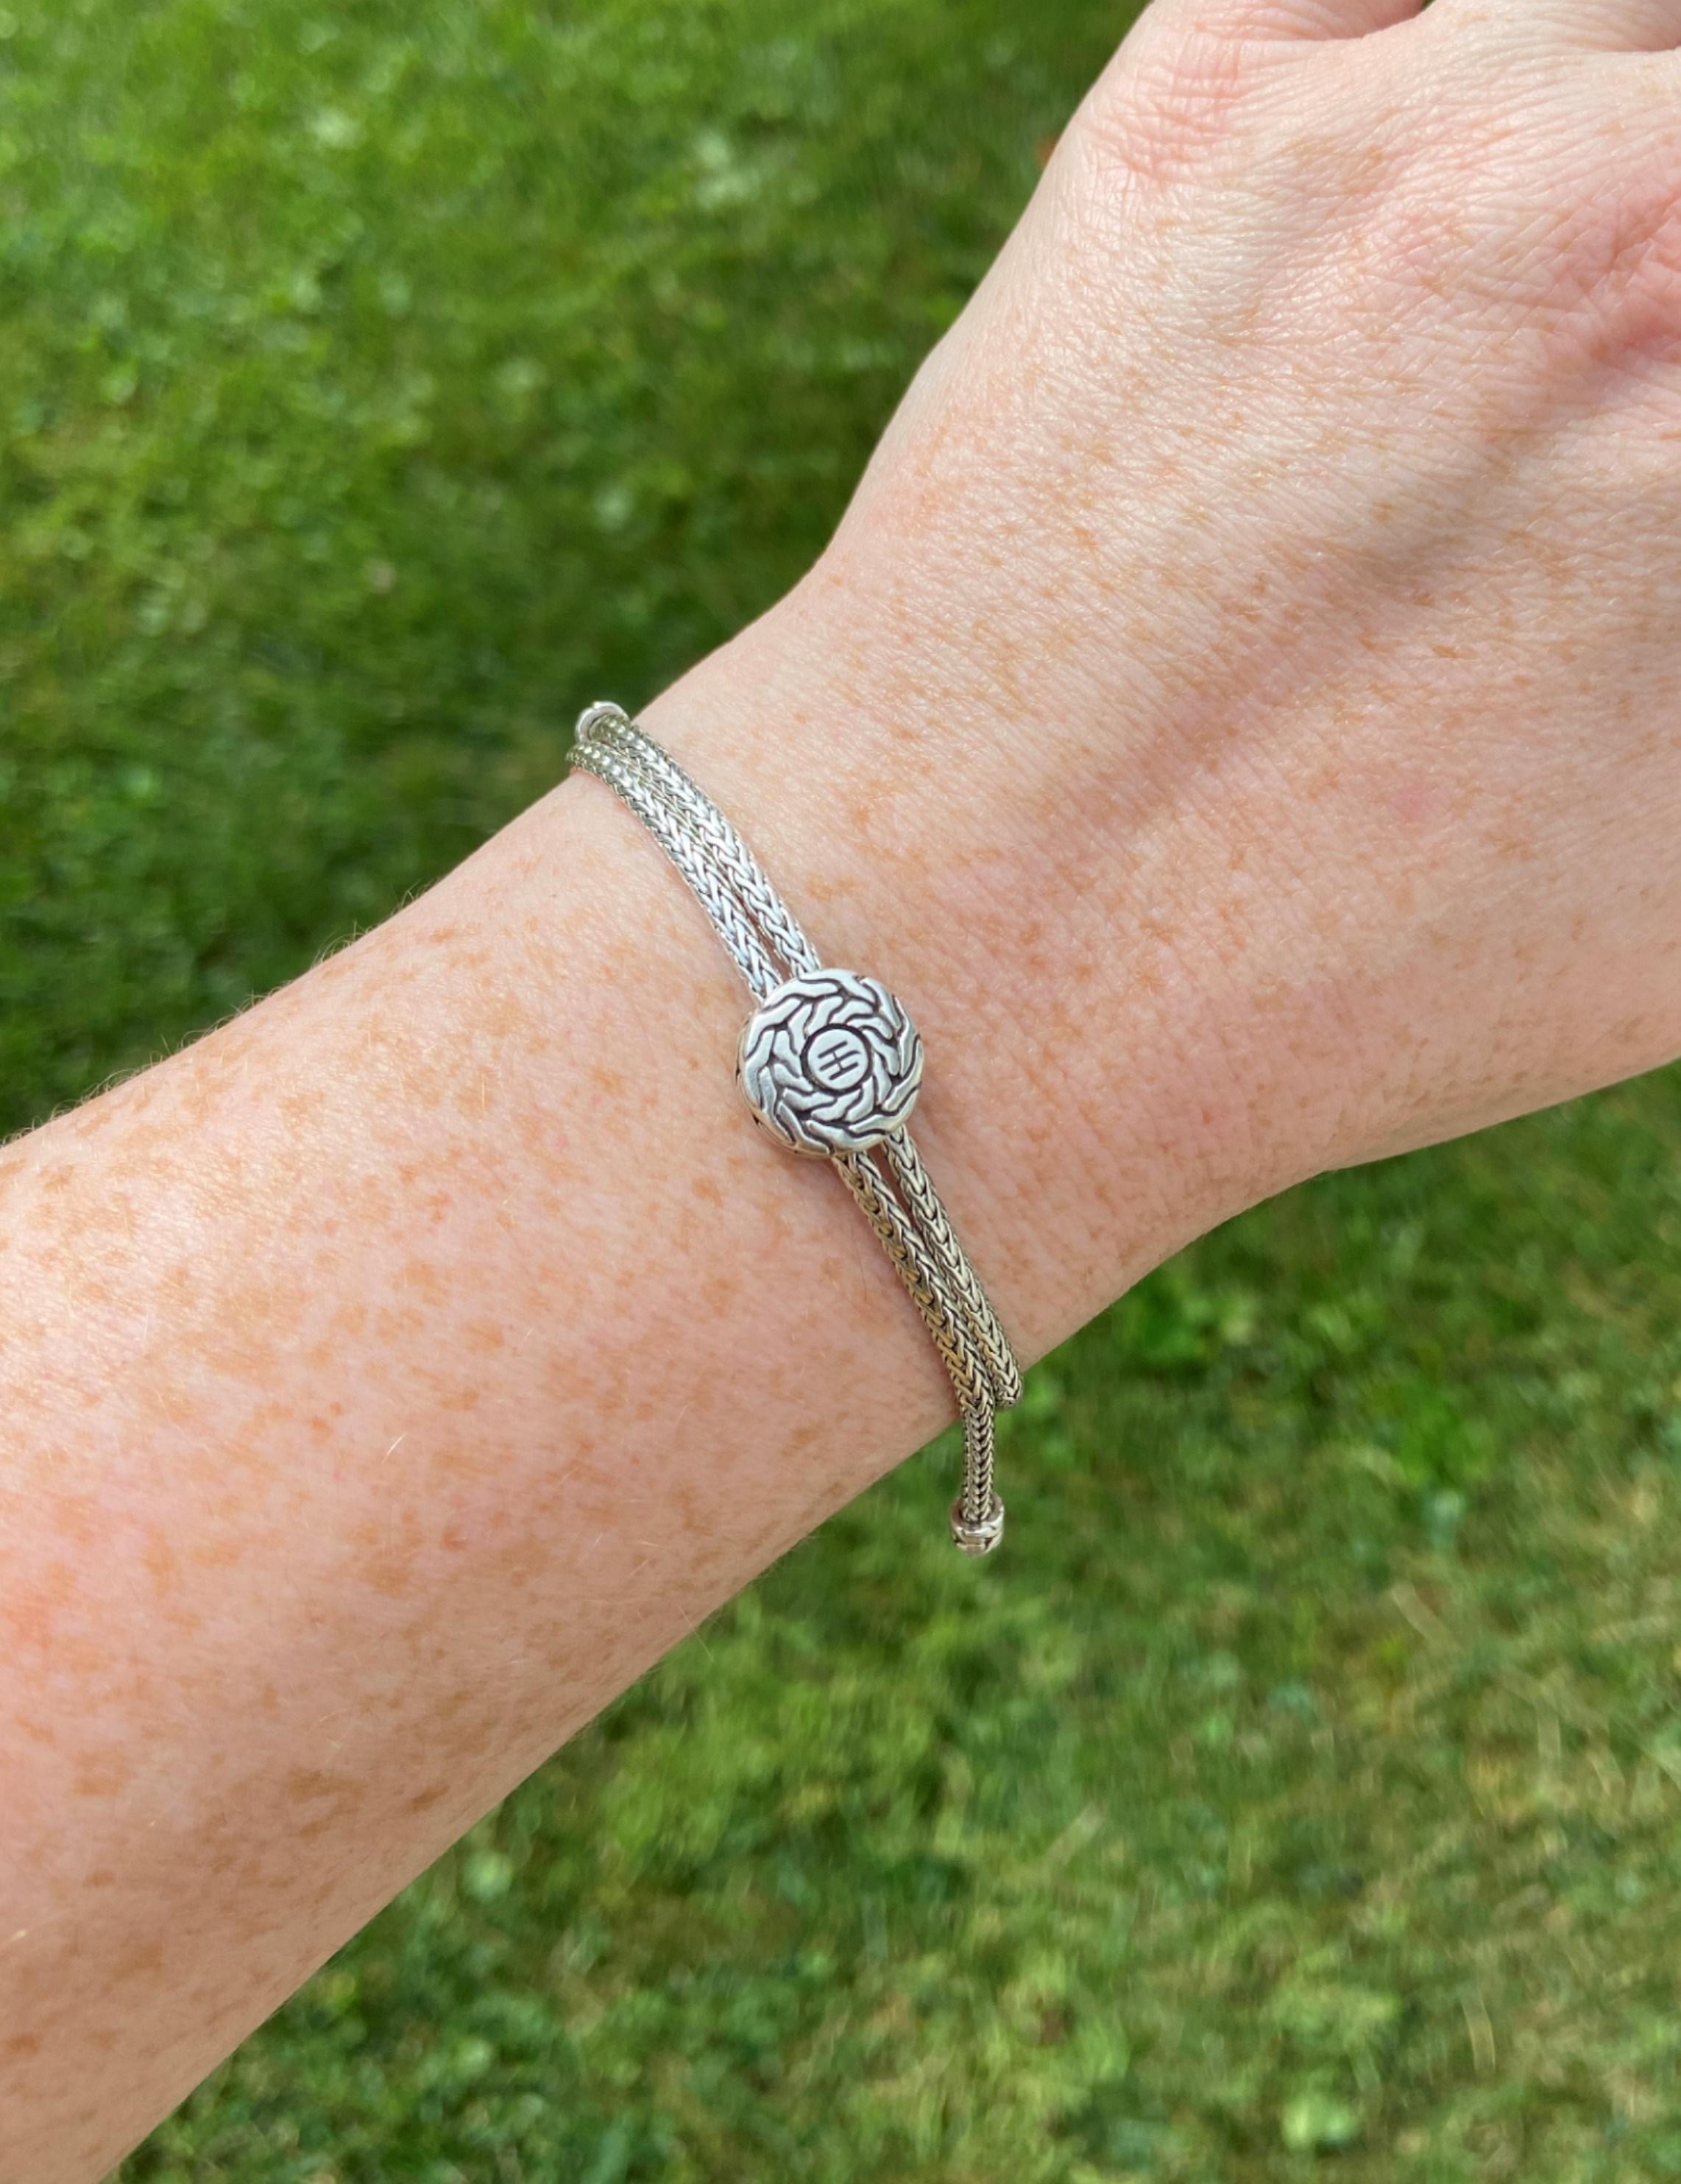 A John Hardy classic, this pull-through bracelet has such fun movement, and unlike many bracelets, it is very easy to put on and take off and is completely adjustable. The wheat chain passes through the central element that provides tension, keeping